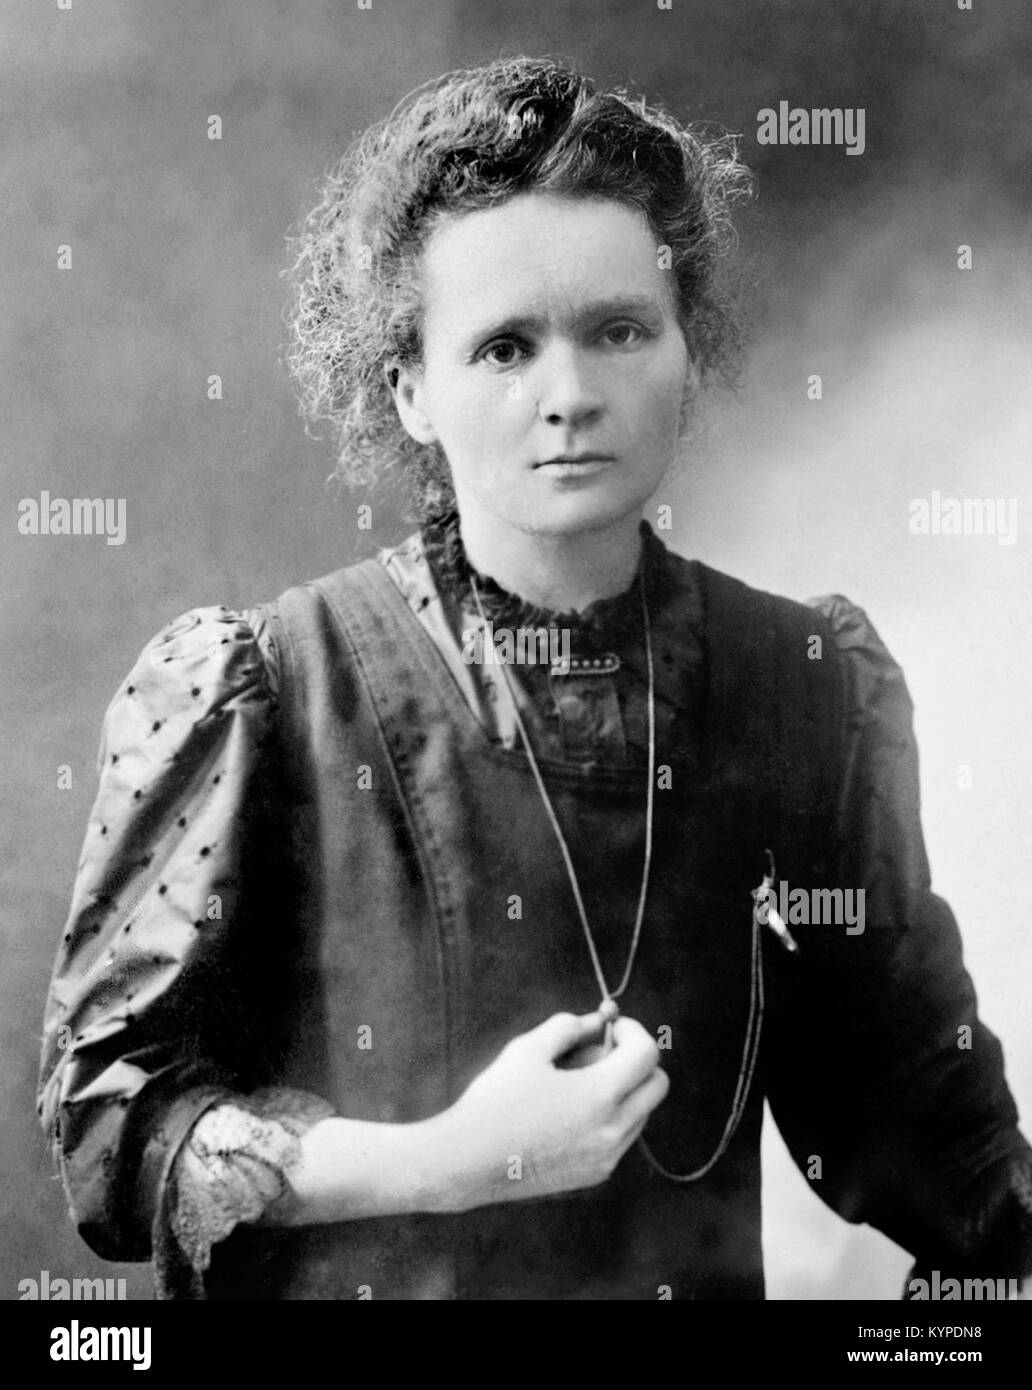 Marie Curie. The Nobel prize winning scientist, Marie Sklodowska Curie (1867-1934). Photo from Bains News Service, date unknown. Stock Photo